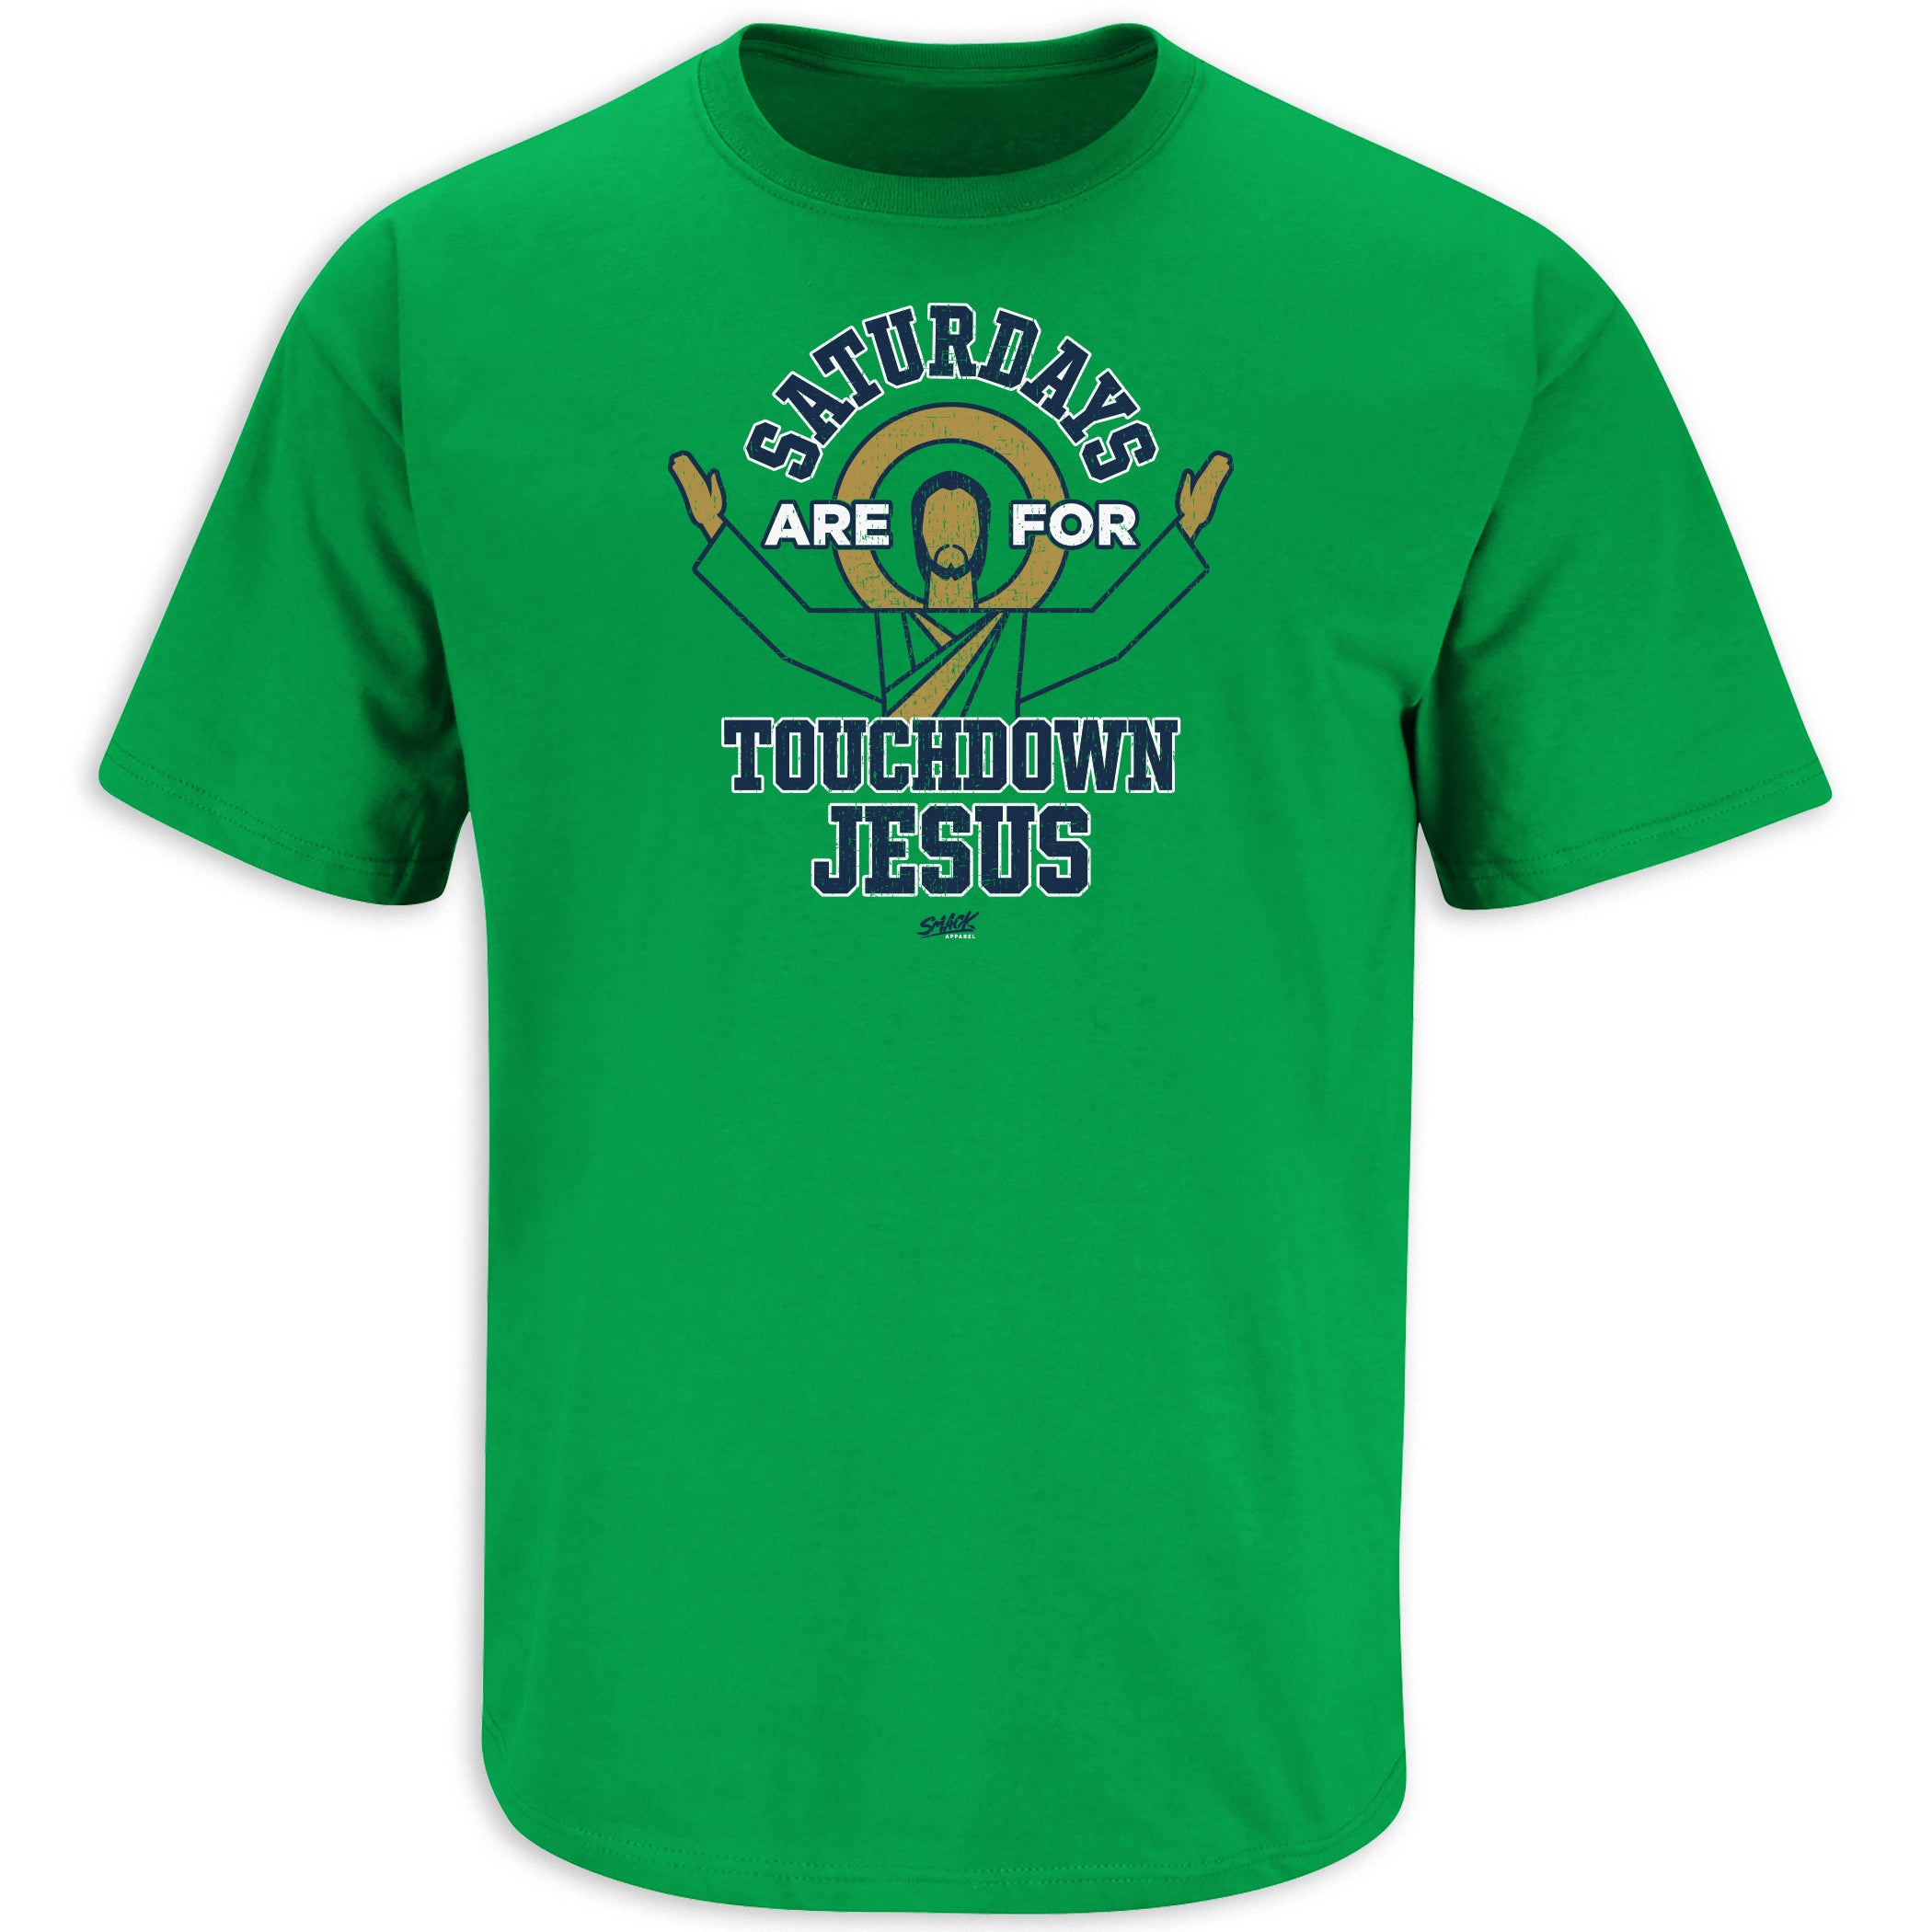 Saturdays are for TD Jesus T-Shirt for Notre Dame College – Smack Apparel